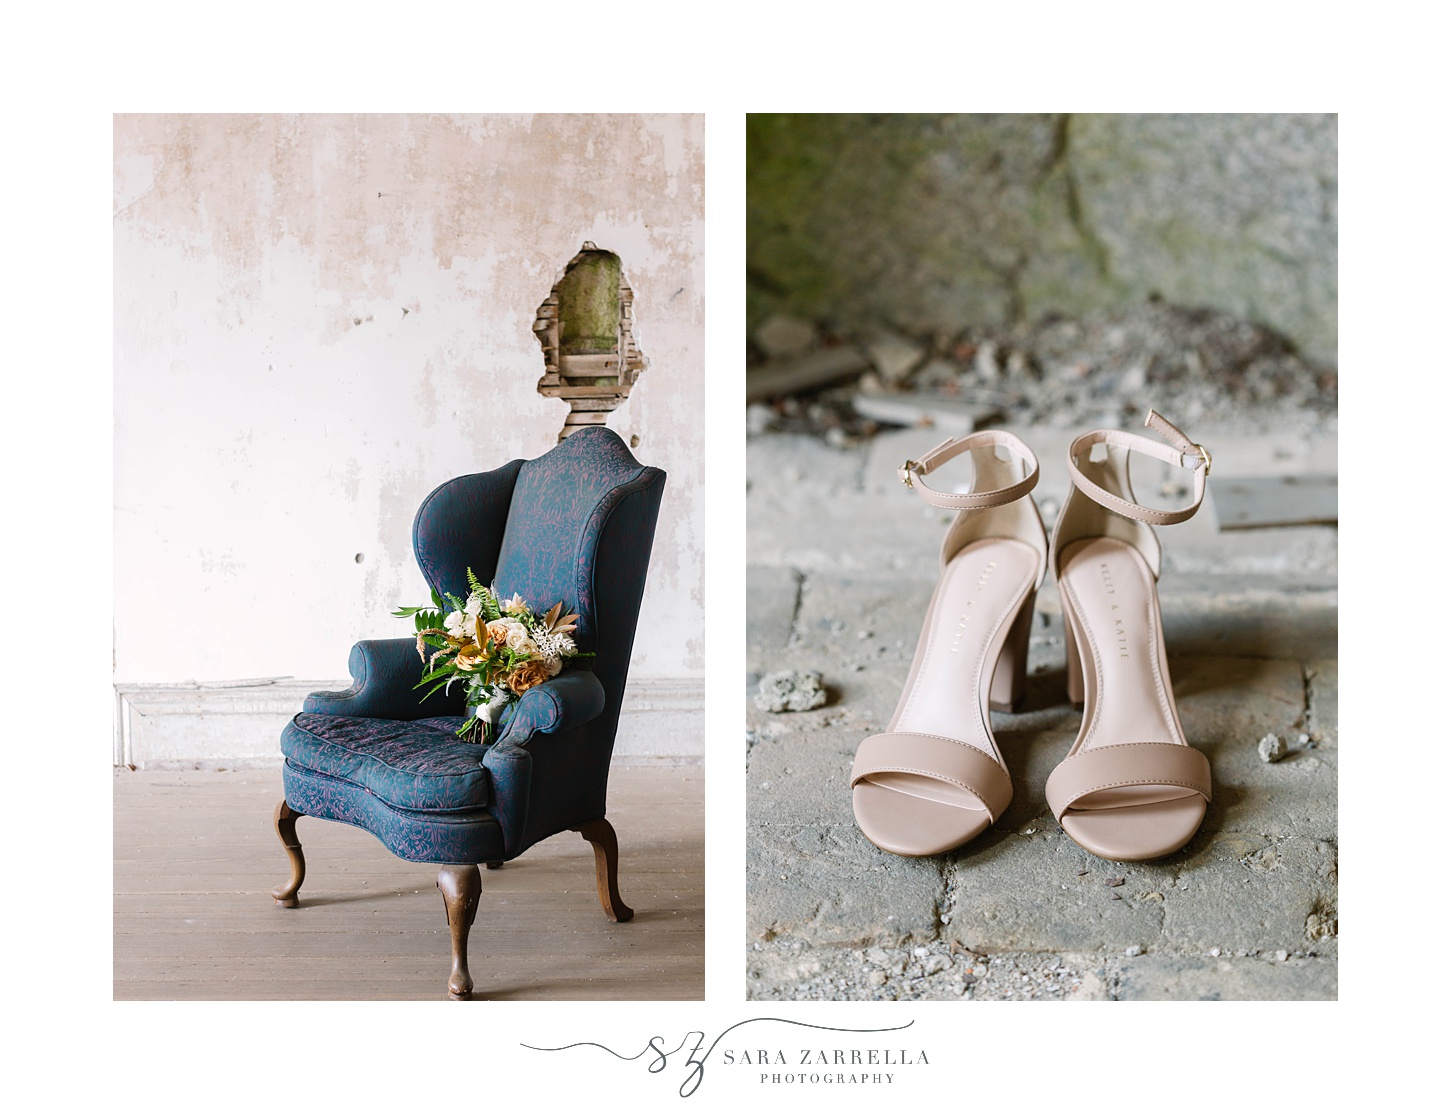 bride's bouquet sits on blue chair and bride's heels